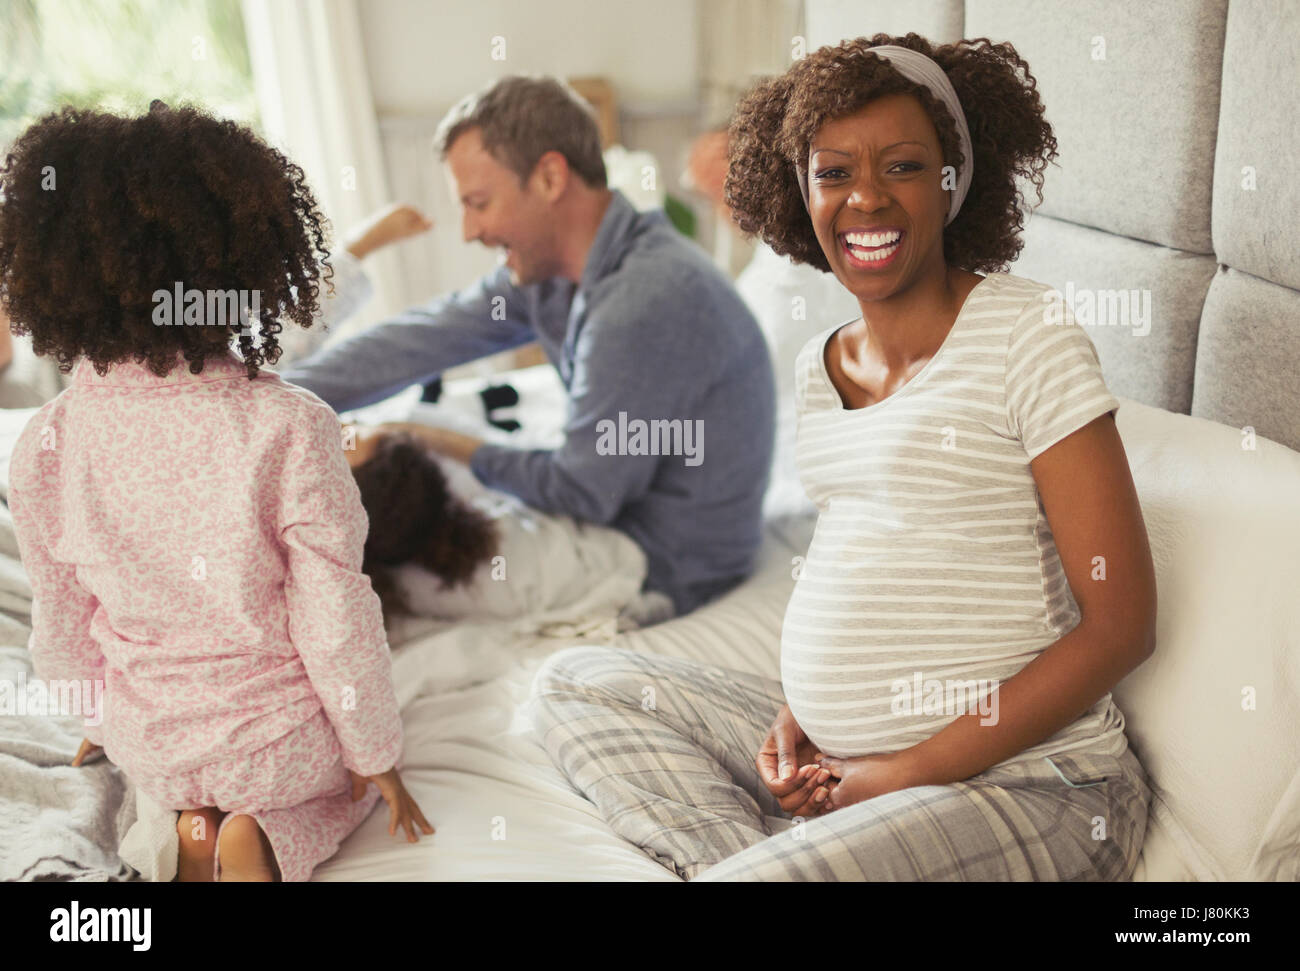 Portrait laughing pregnant woman with young family on bed Stock Photo